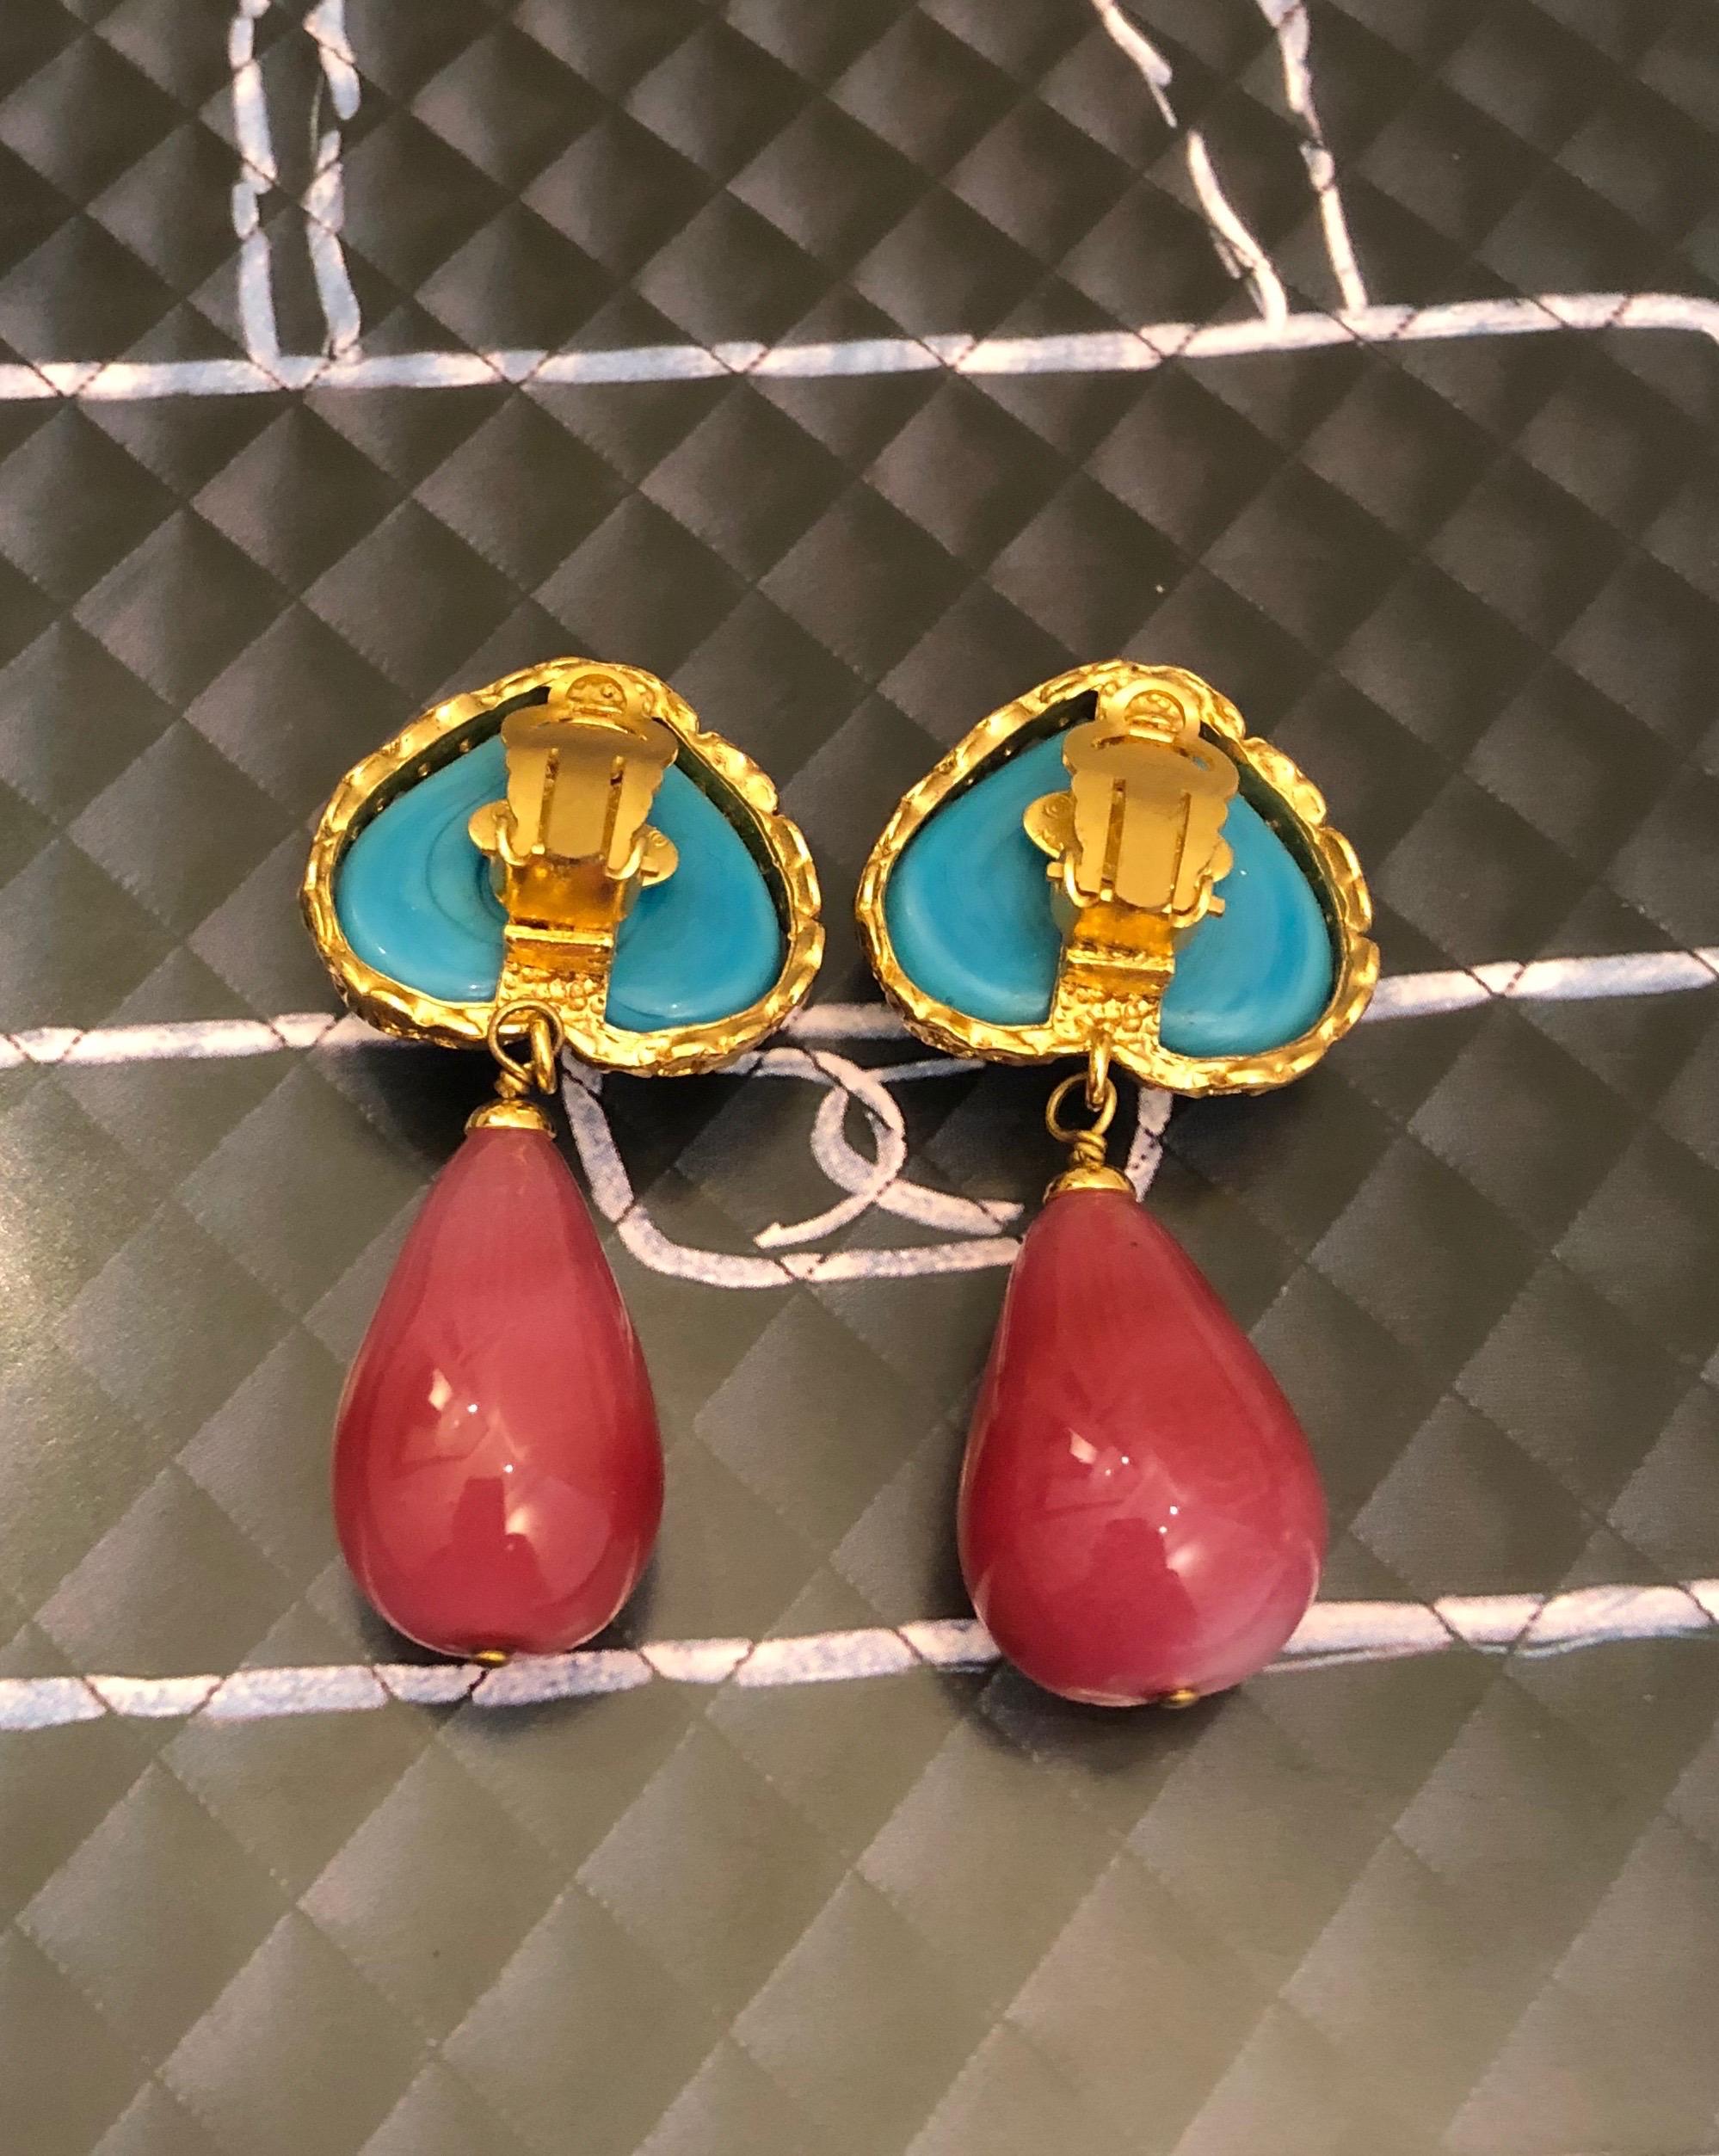 Early 1990s Chanel dangly earrings featuring a turquoise gripoix heart and a red gripiox pearl drop enclosed by a gold toned CC interlocking frame. Designed by Victoire de Castellane. Stamp 29 made in France. Come with box.

Condition - Minor signs